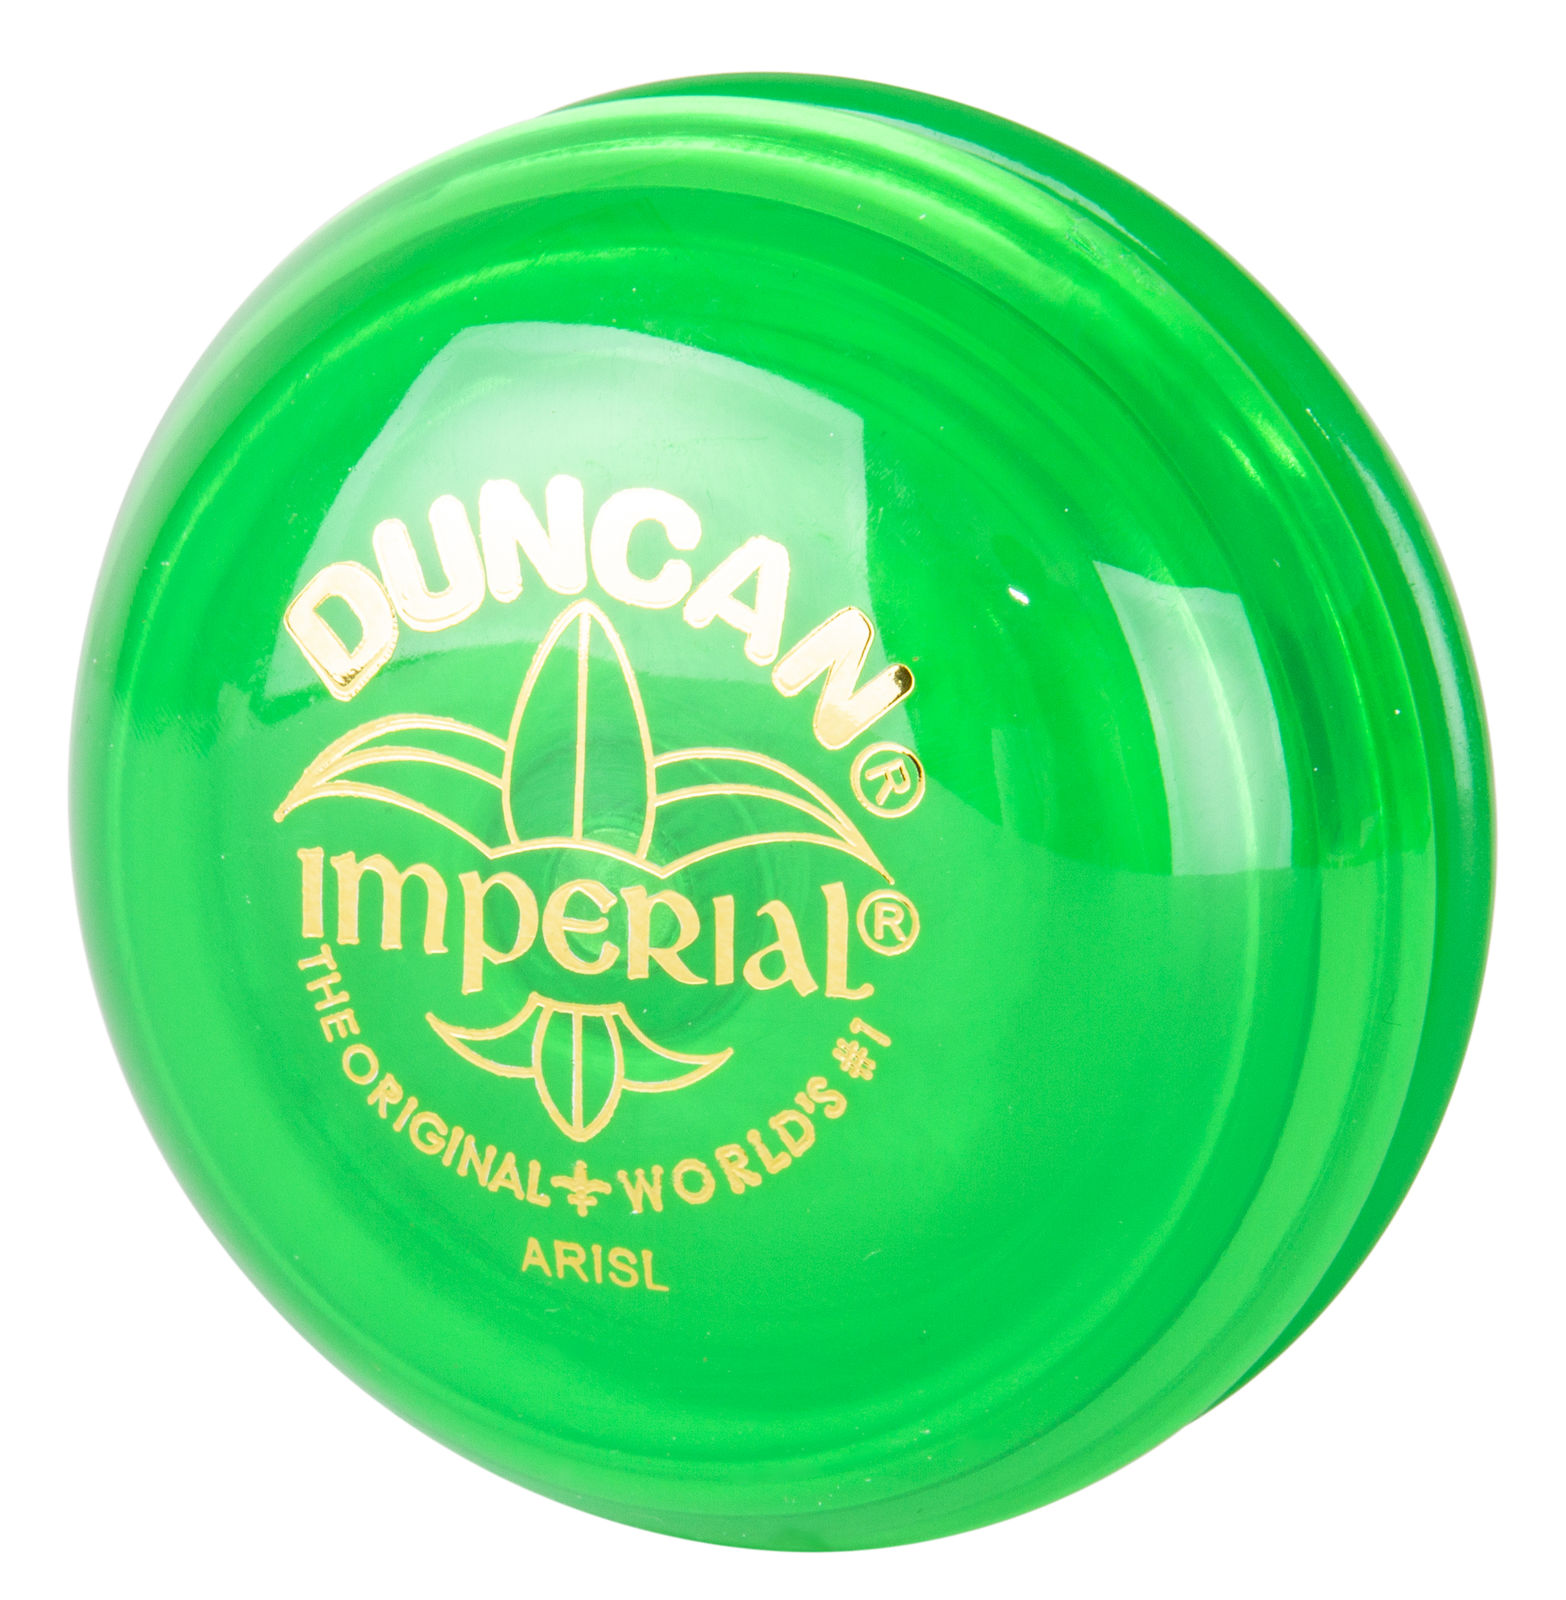 Duncan Toys Imperial Yo-Yo, Beginner Yo-Yo with String, Steel Axle and Plastic Body, Colors May Vary - image 5 of 7